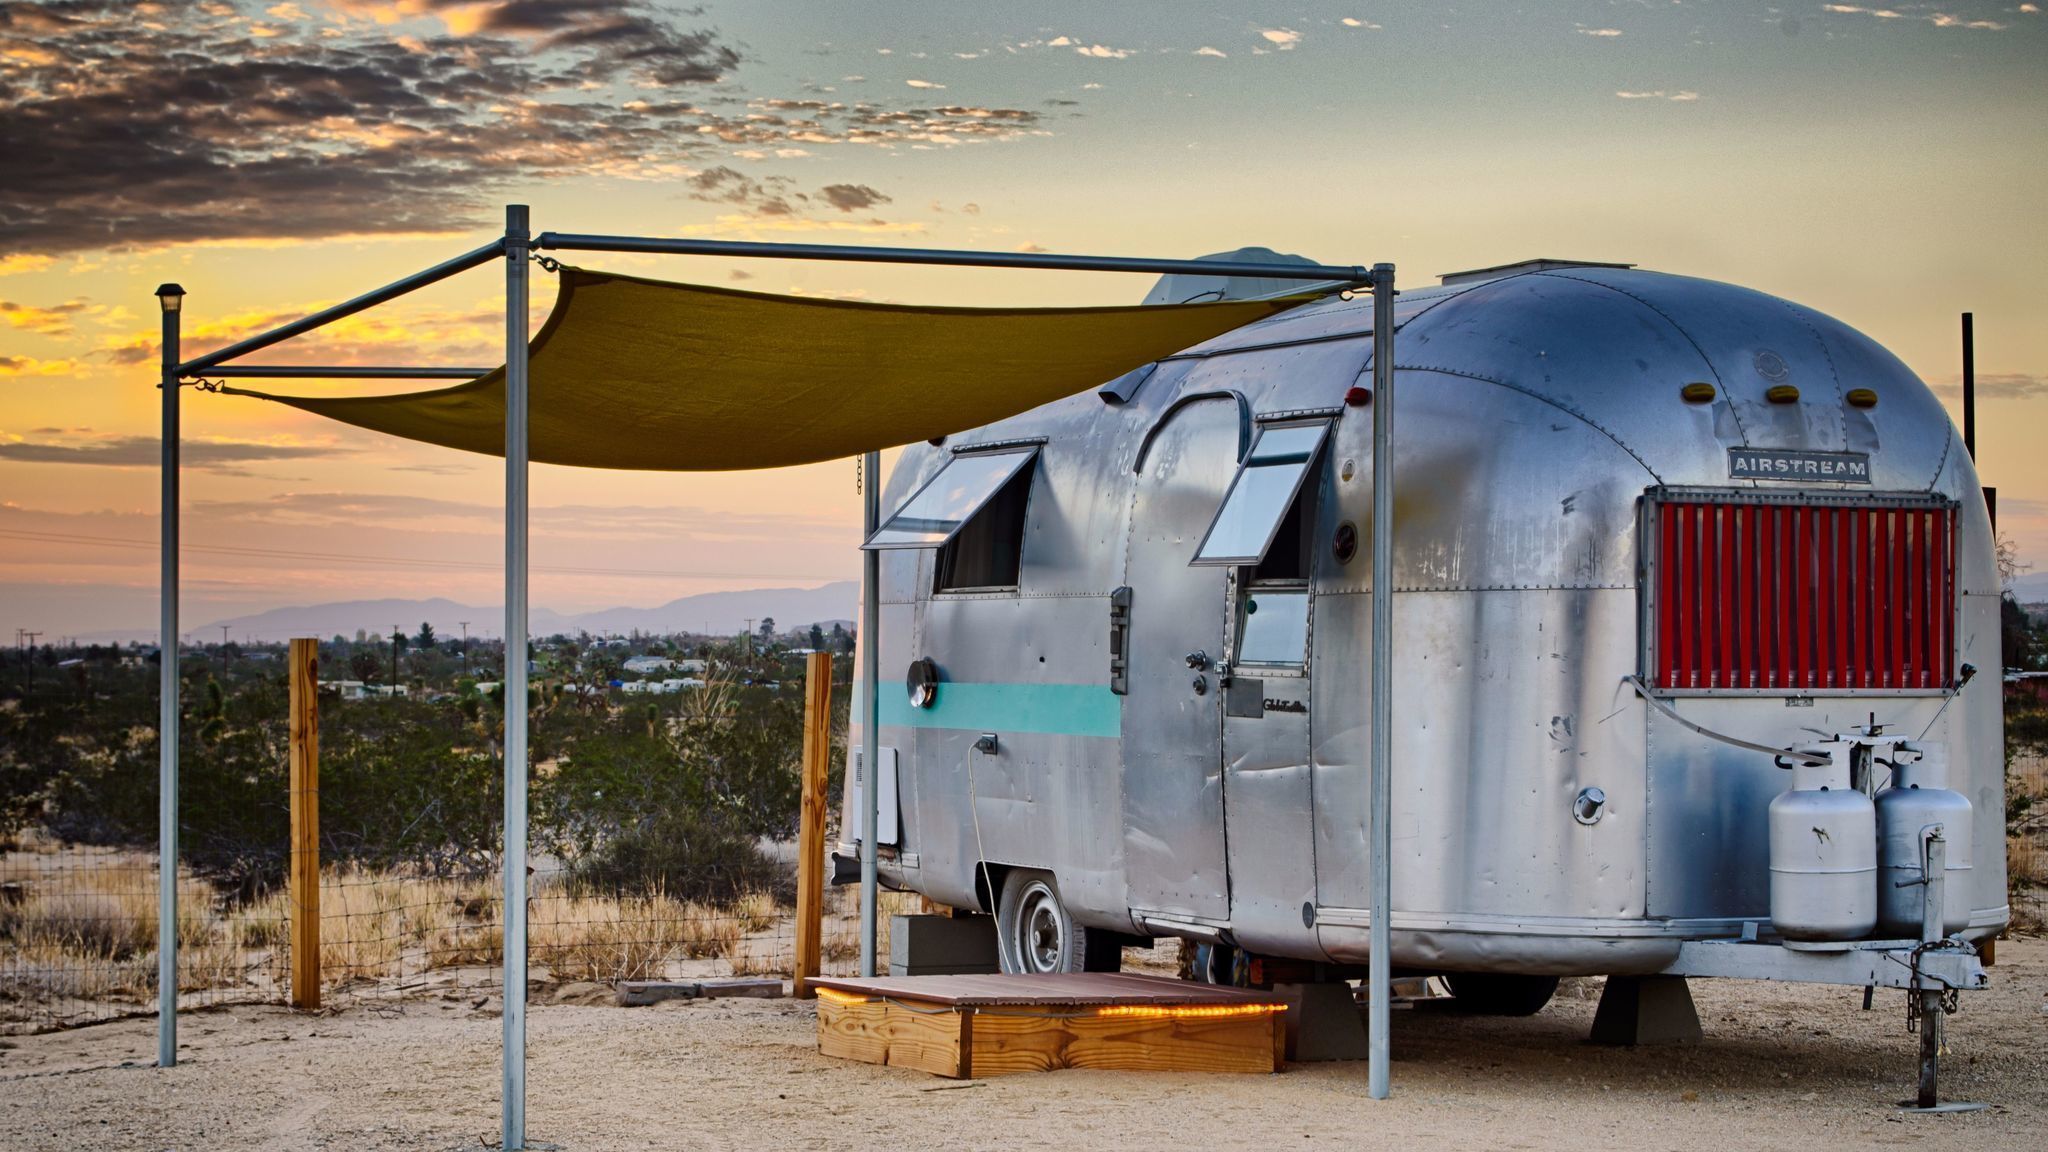 With These Hotels You Can Experience Airstream Travel Without A Hitch